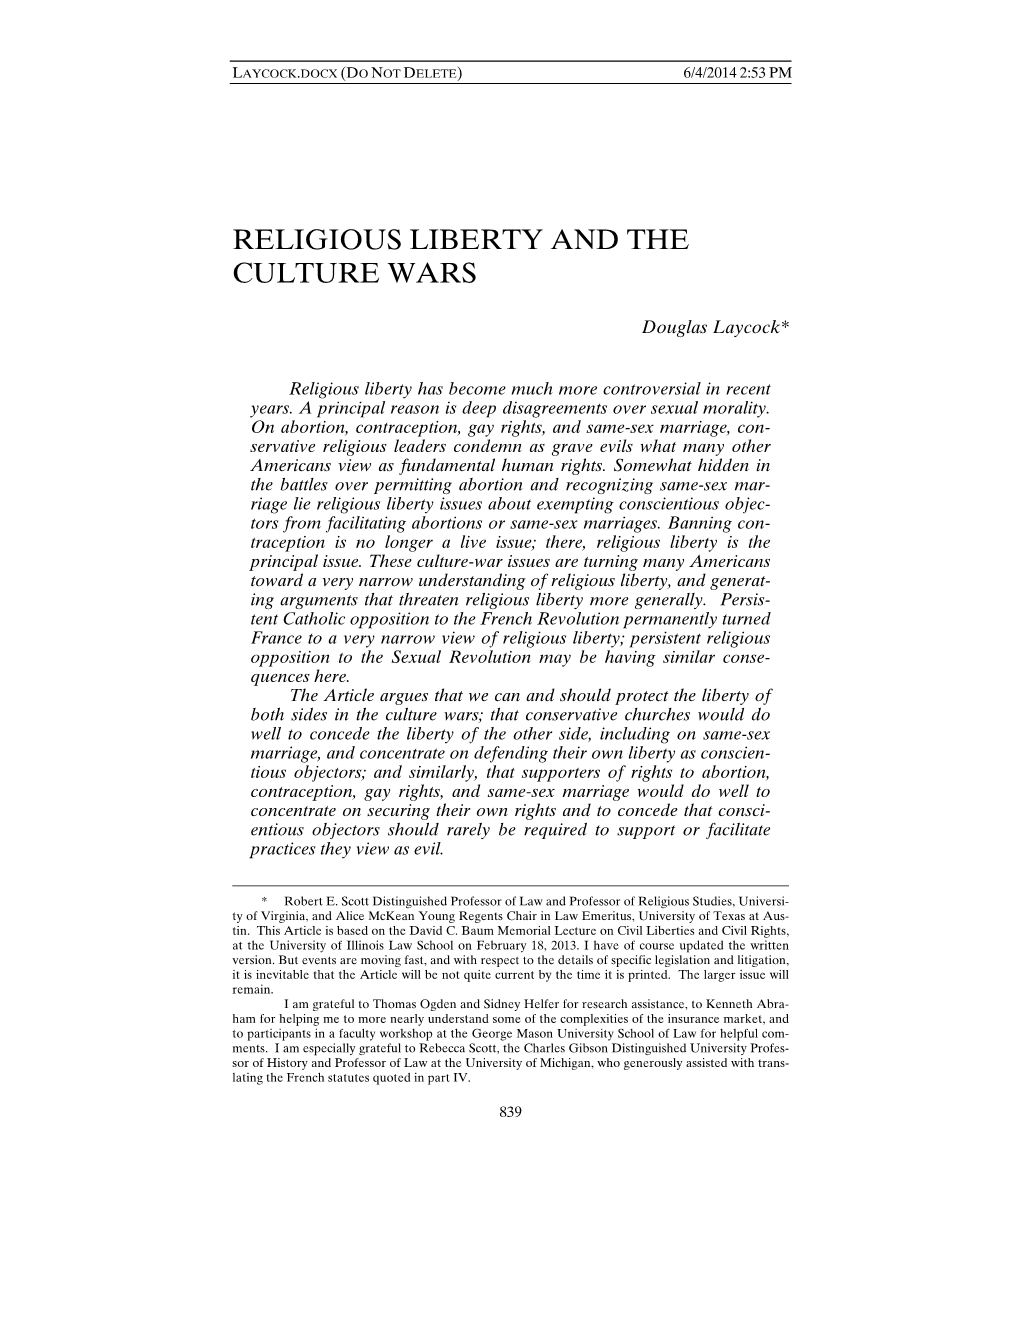 Religious Liberty and the Culture Wars